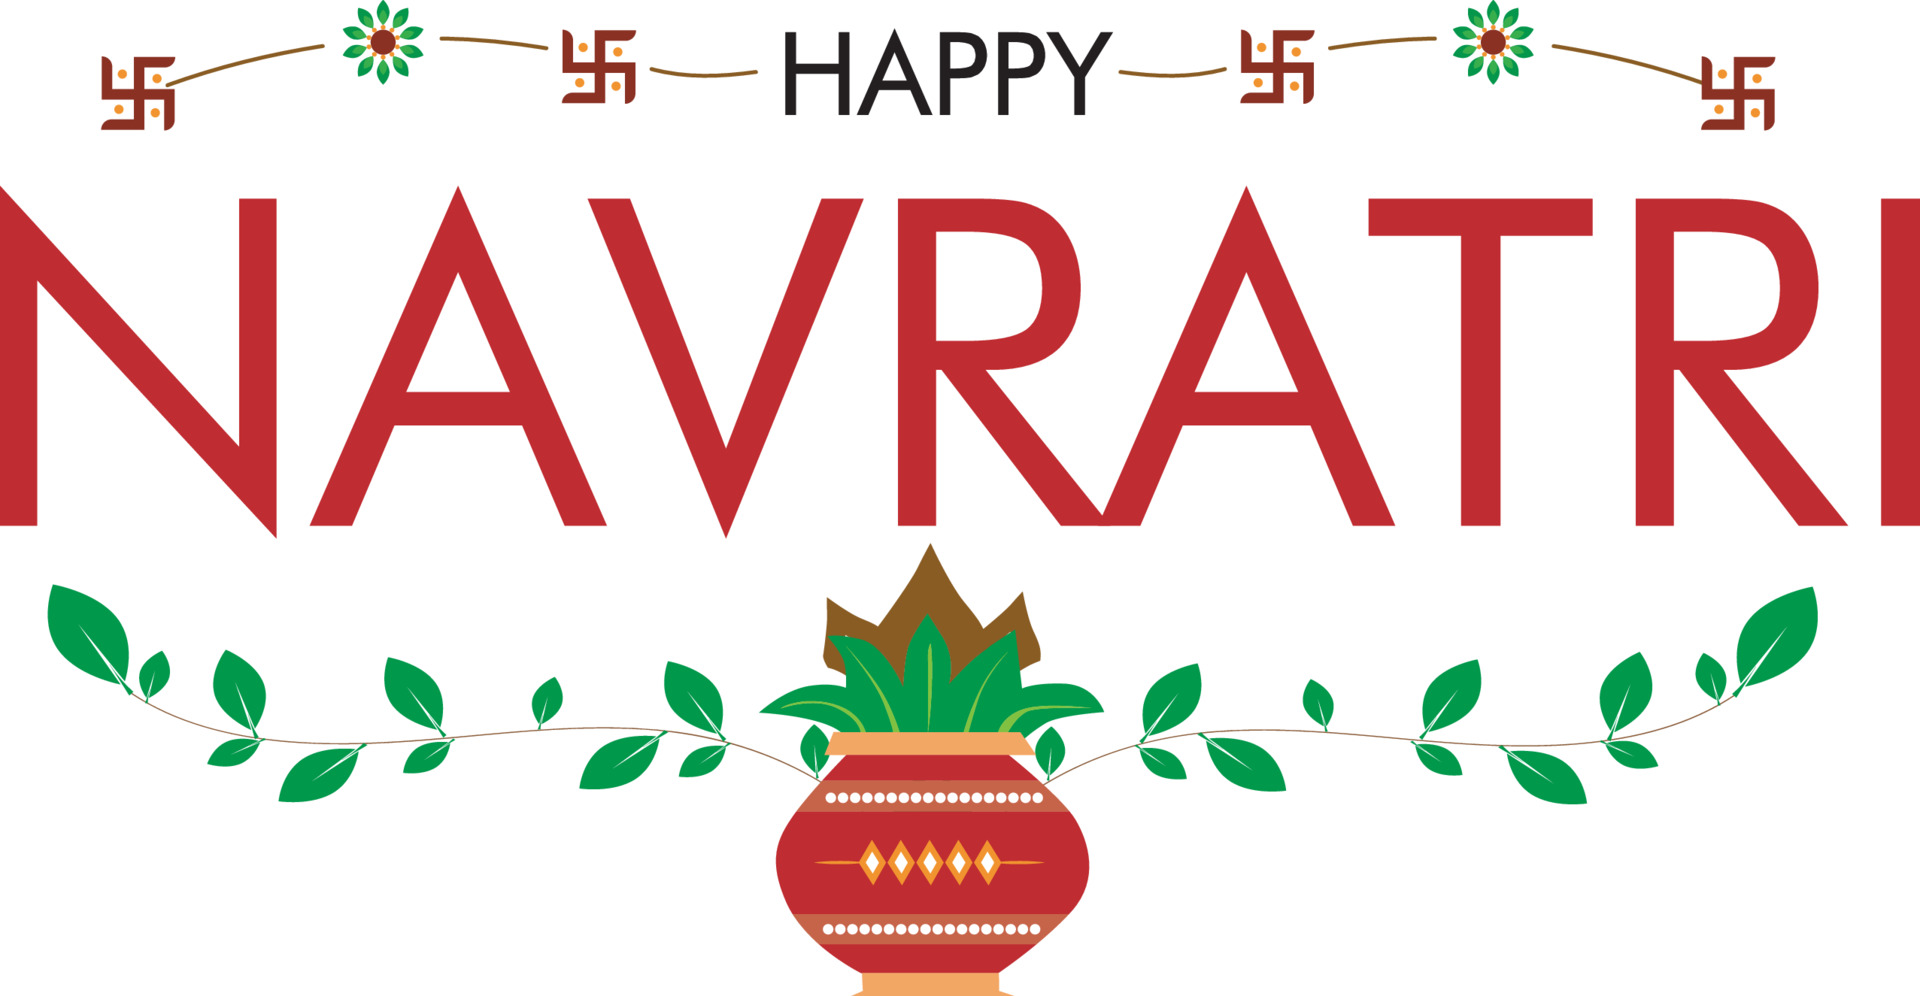 Happy Navratri 2021 Images Quotes Wishes Messages Cards Greetings  Pictures and GIFs  Times of India